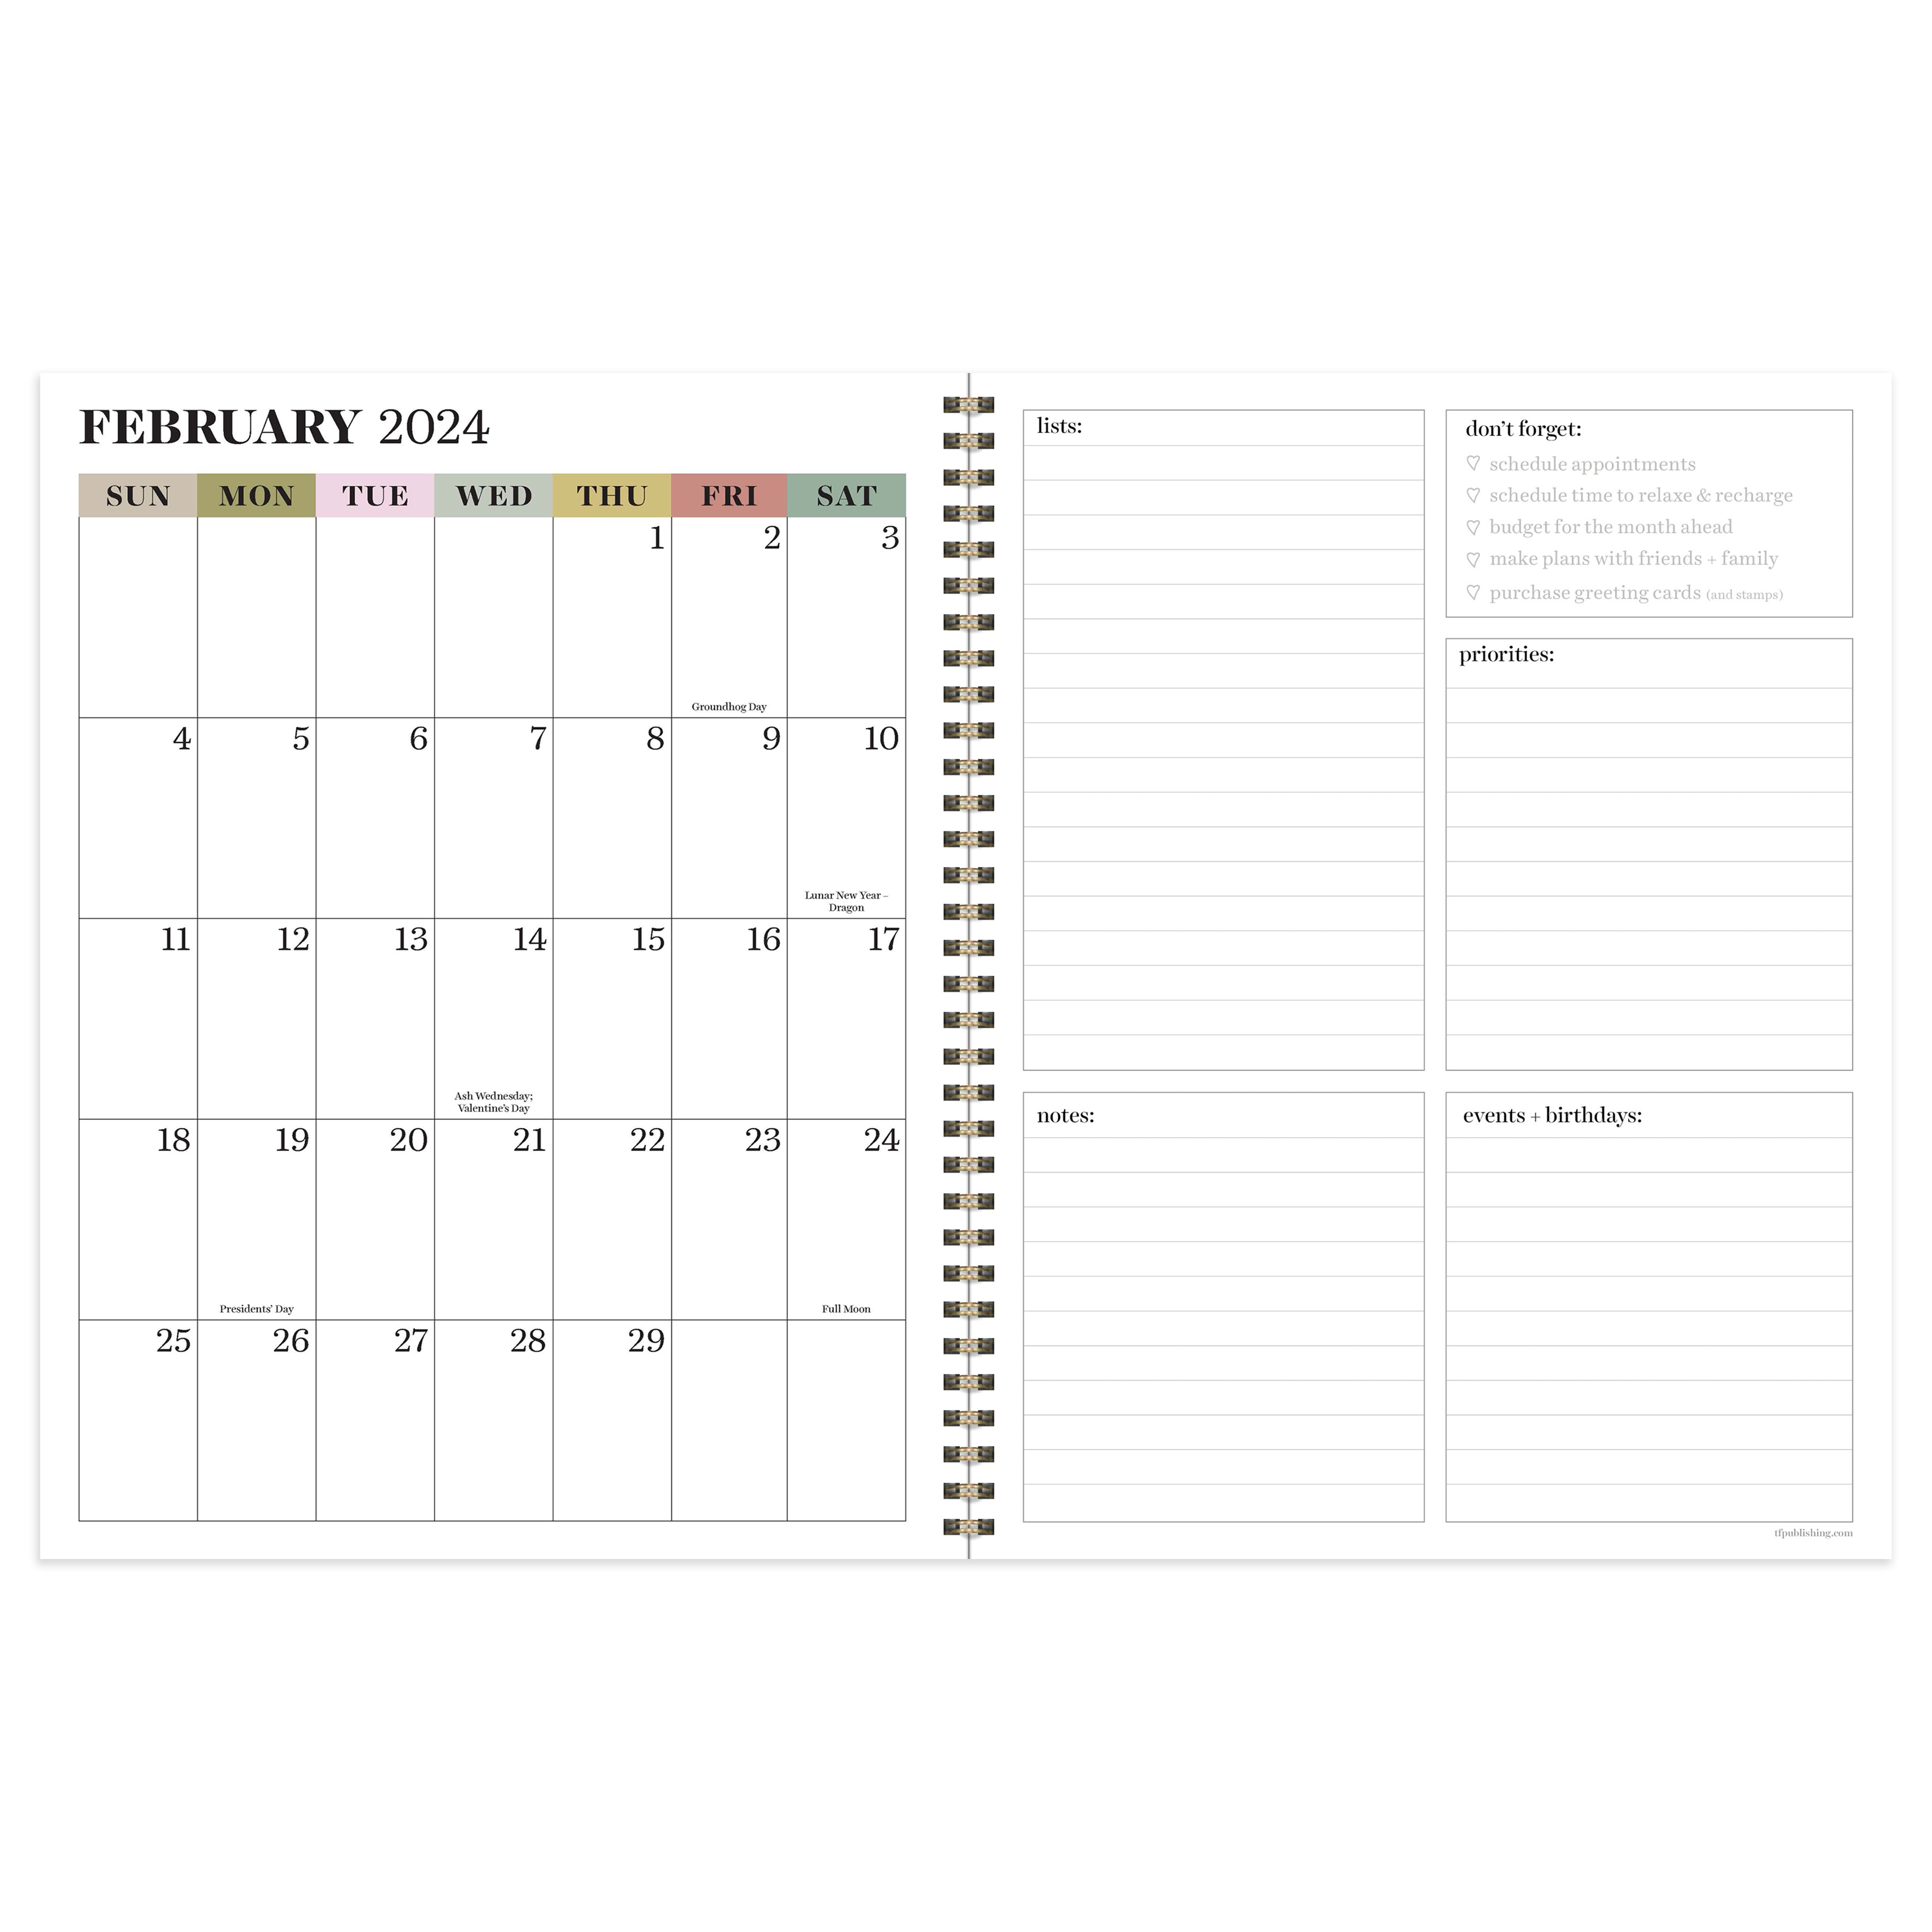 2024 Fungi - Large Weekly, Monthly Diary/Planner